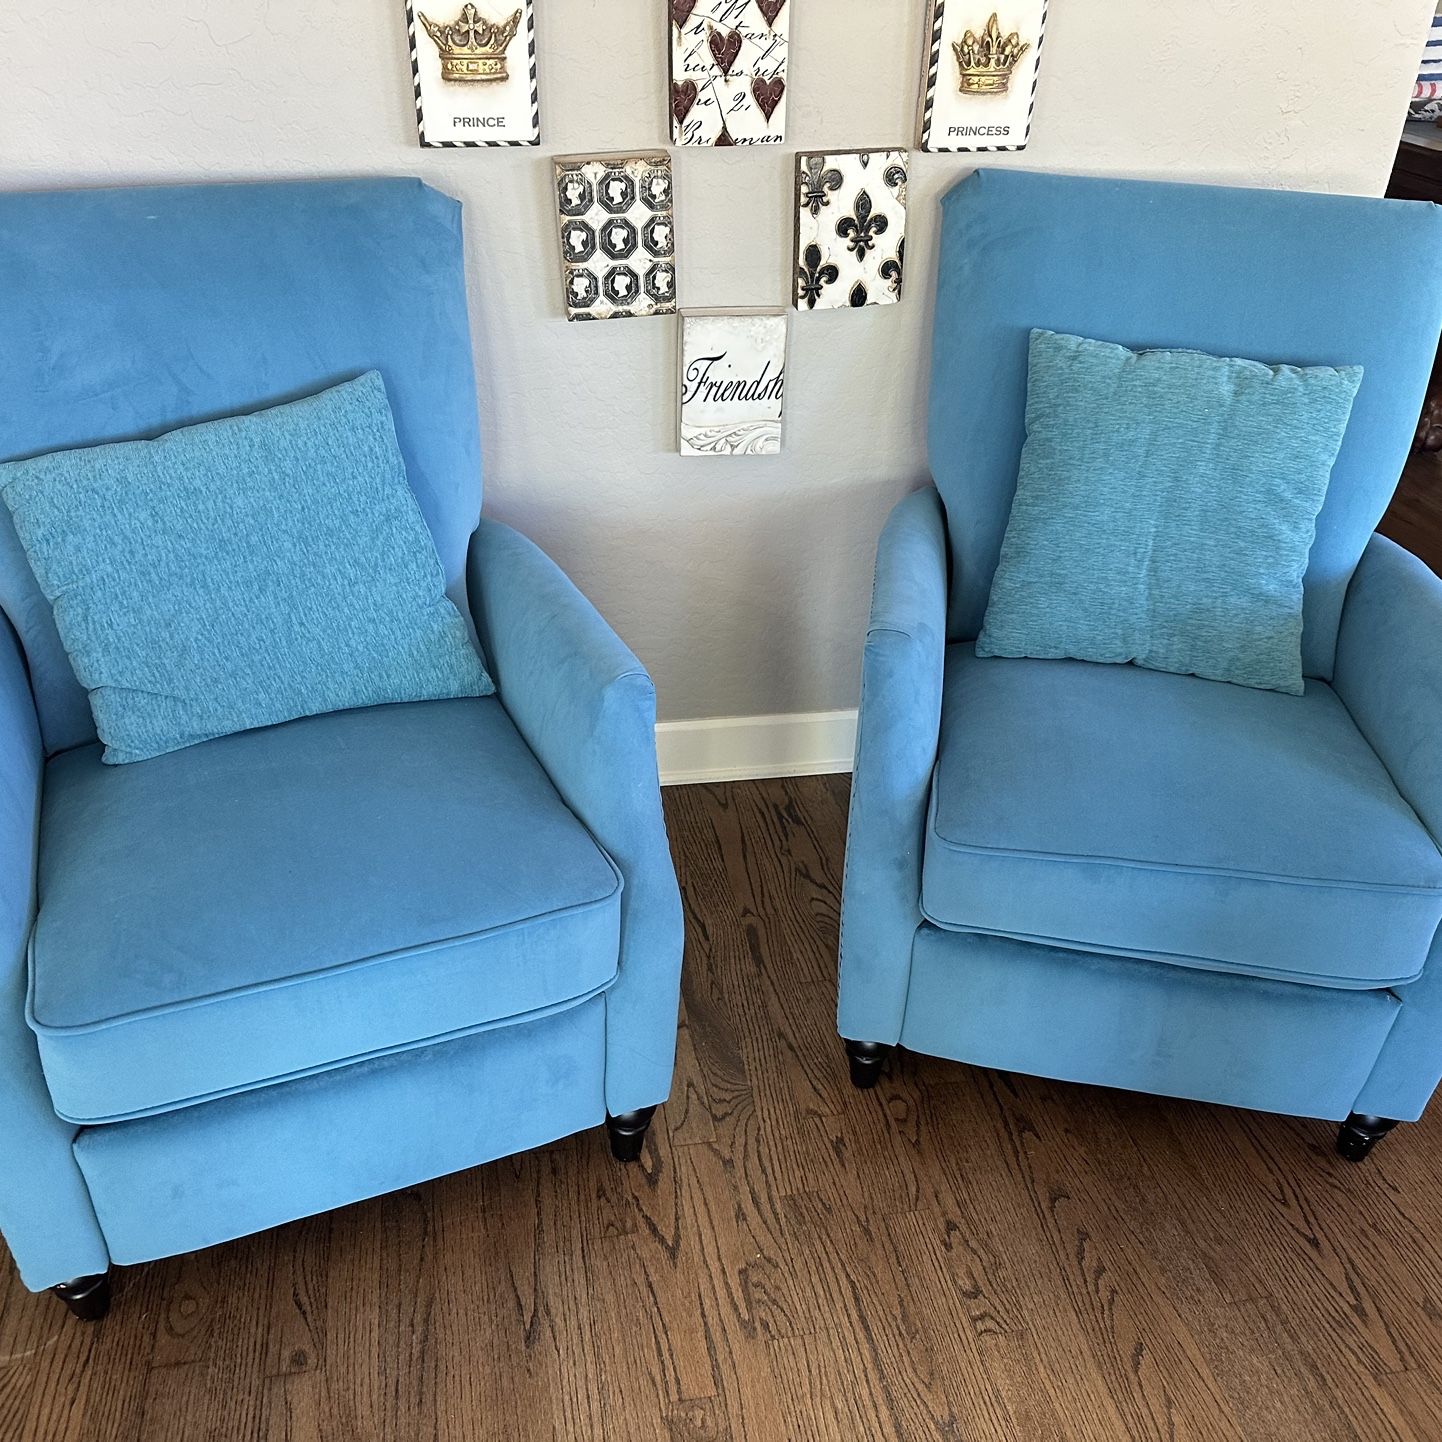 Blue Recliners For Sale